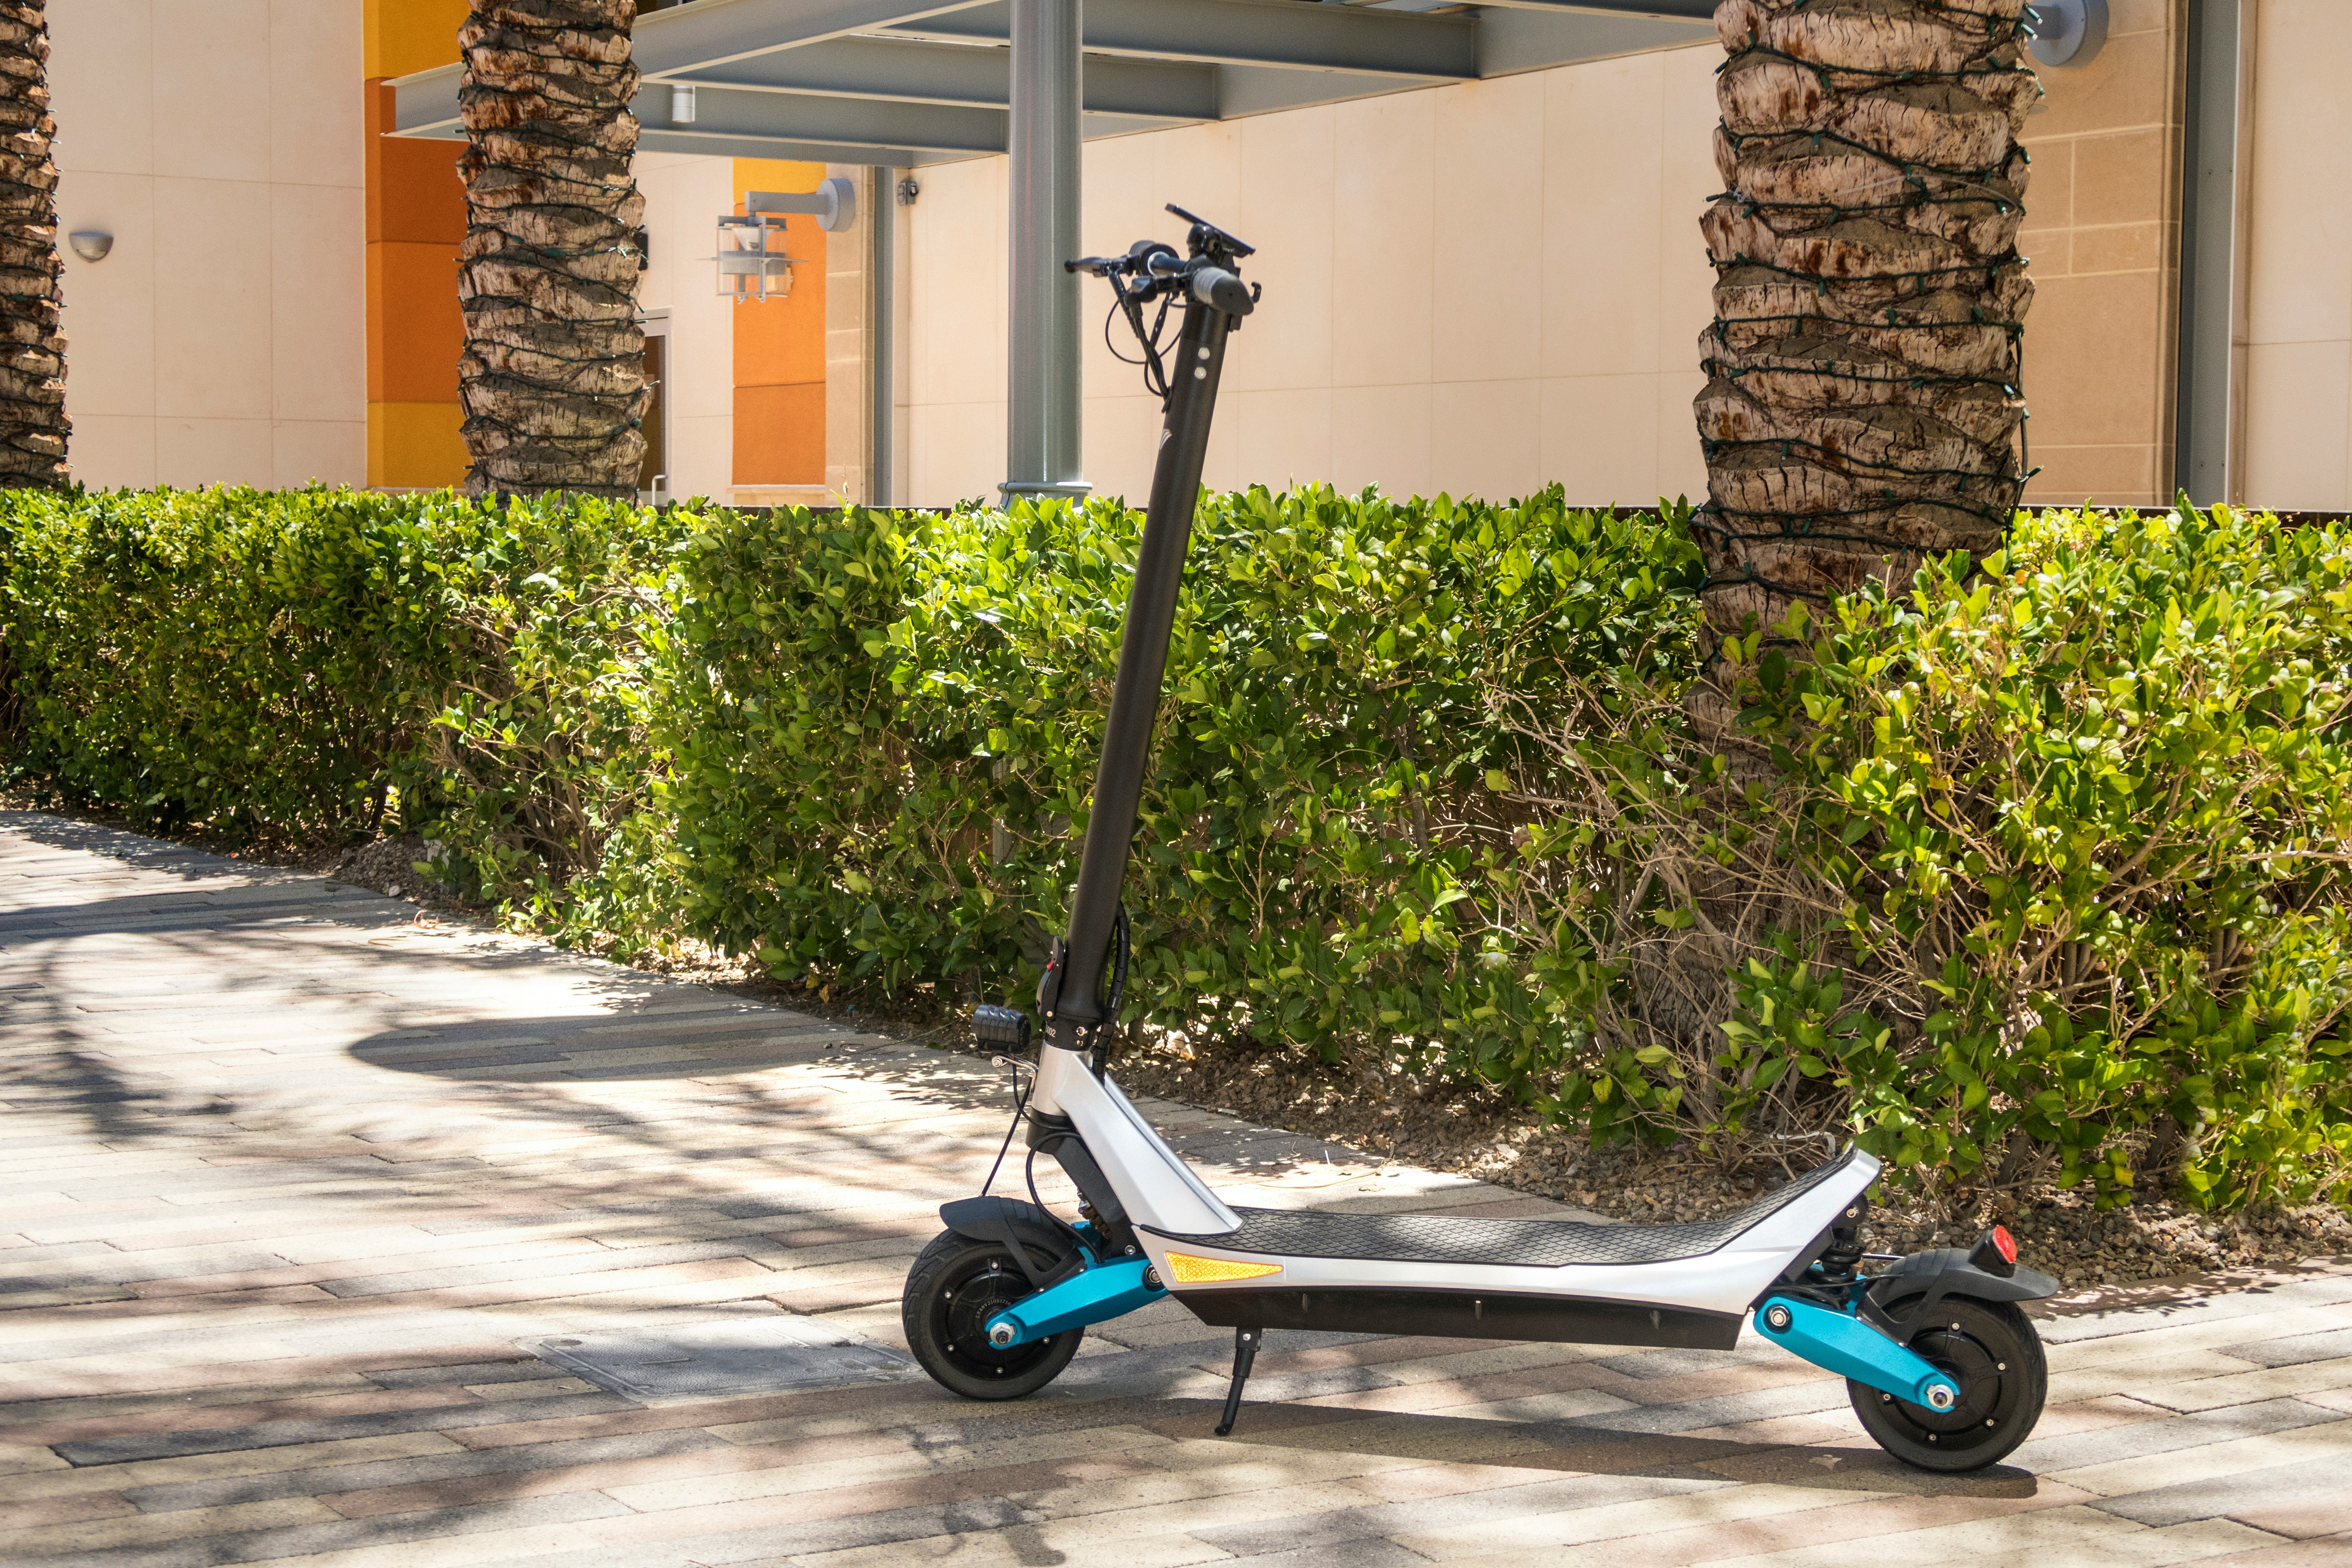 blue and black kick scooter near green plants during daytime